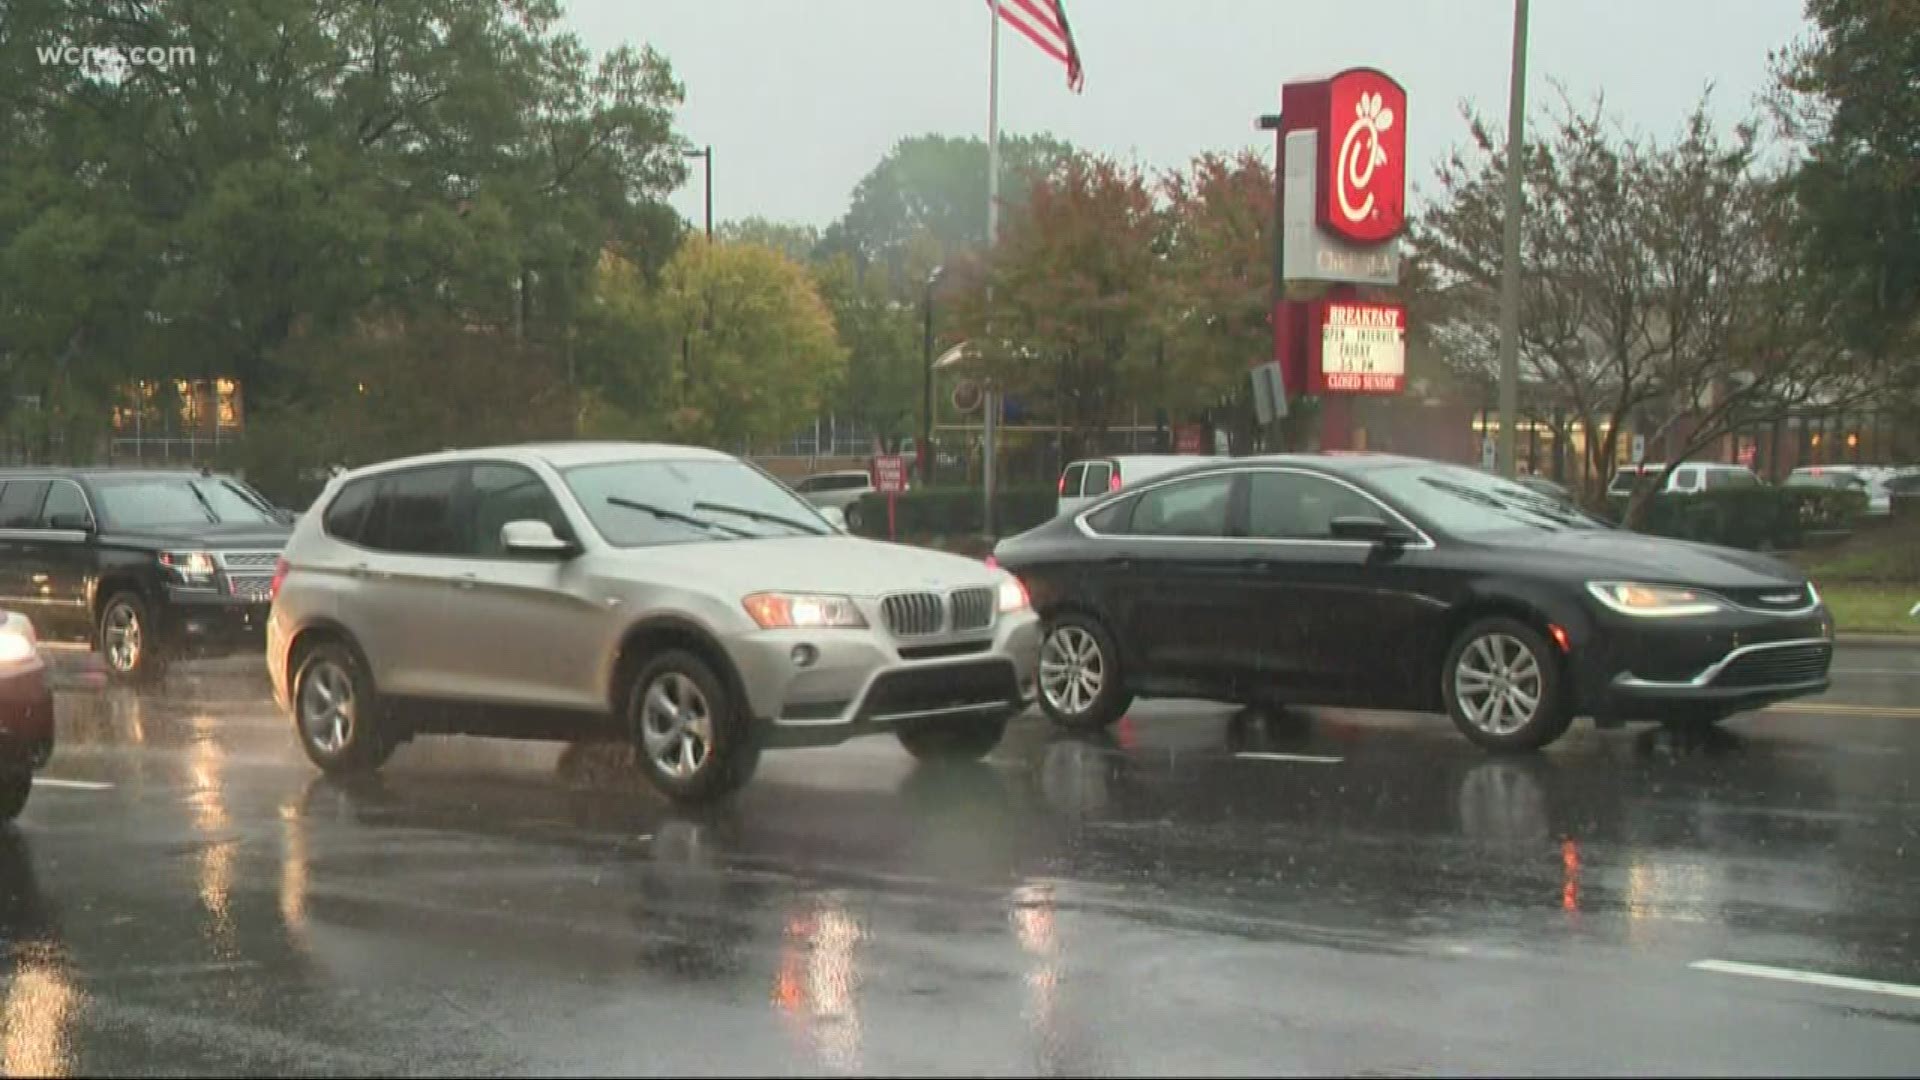 The Queen City loves Chick-fil-A. It's evident by the long lines in the drive-thru. But those long lines are causing big problems on busy Charlotte roads.